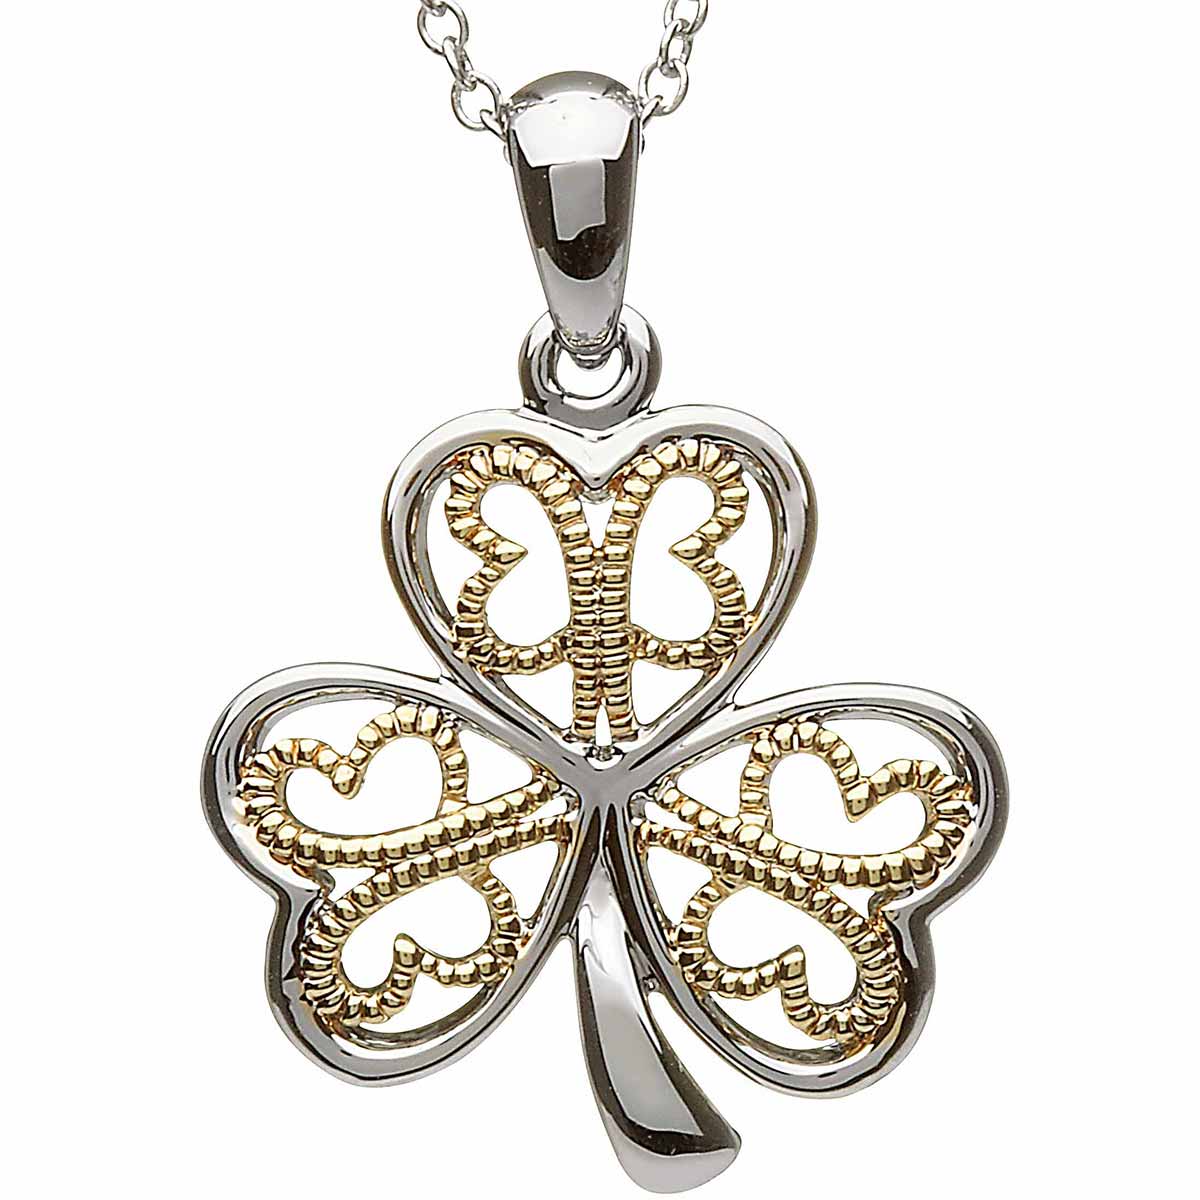 Product image for Shamrock Pendant - Sterling Silver Filigree Shamrock Pendant with Chain